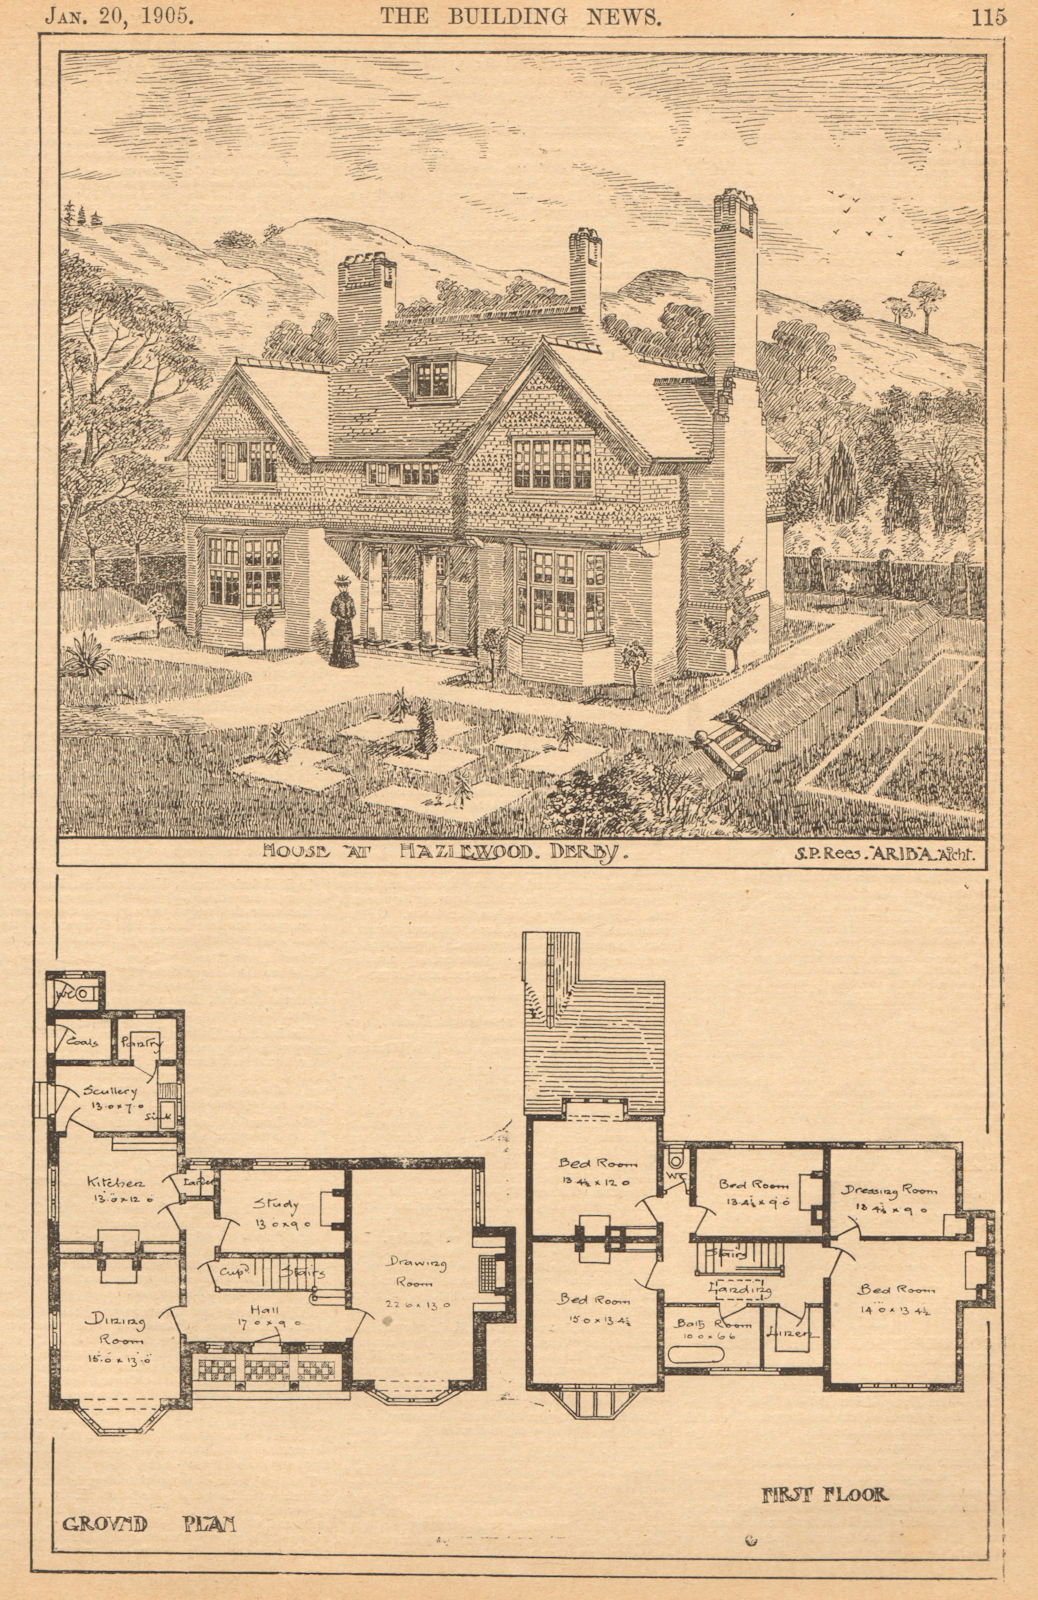 Associate Product House at Hazlewood, Derby, S.P. Rees A.R.I.B.A., Archt. Plans. Derbyshire 1905